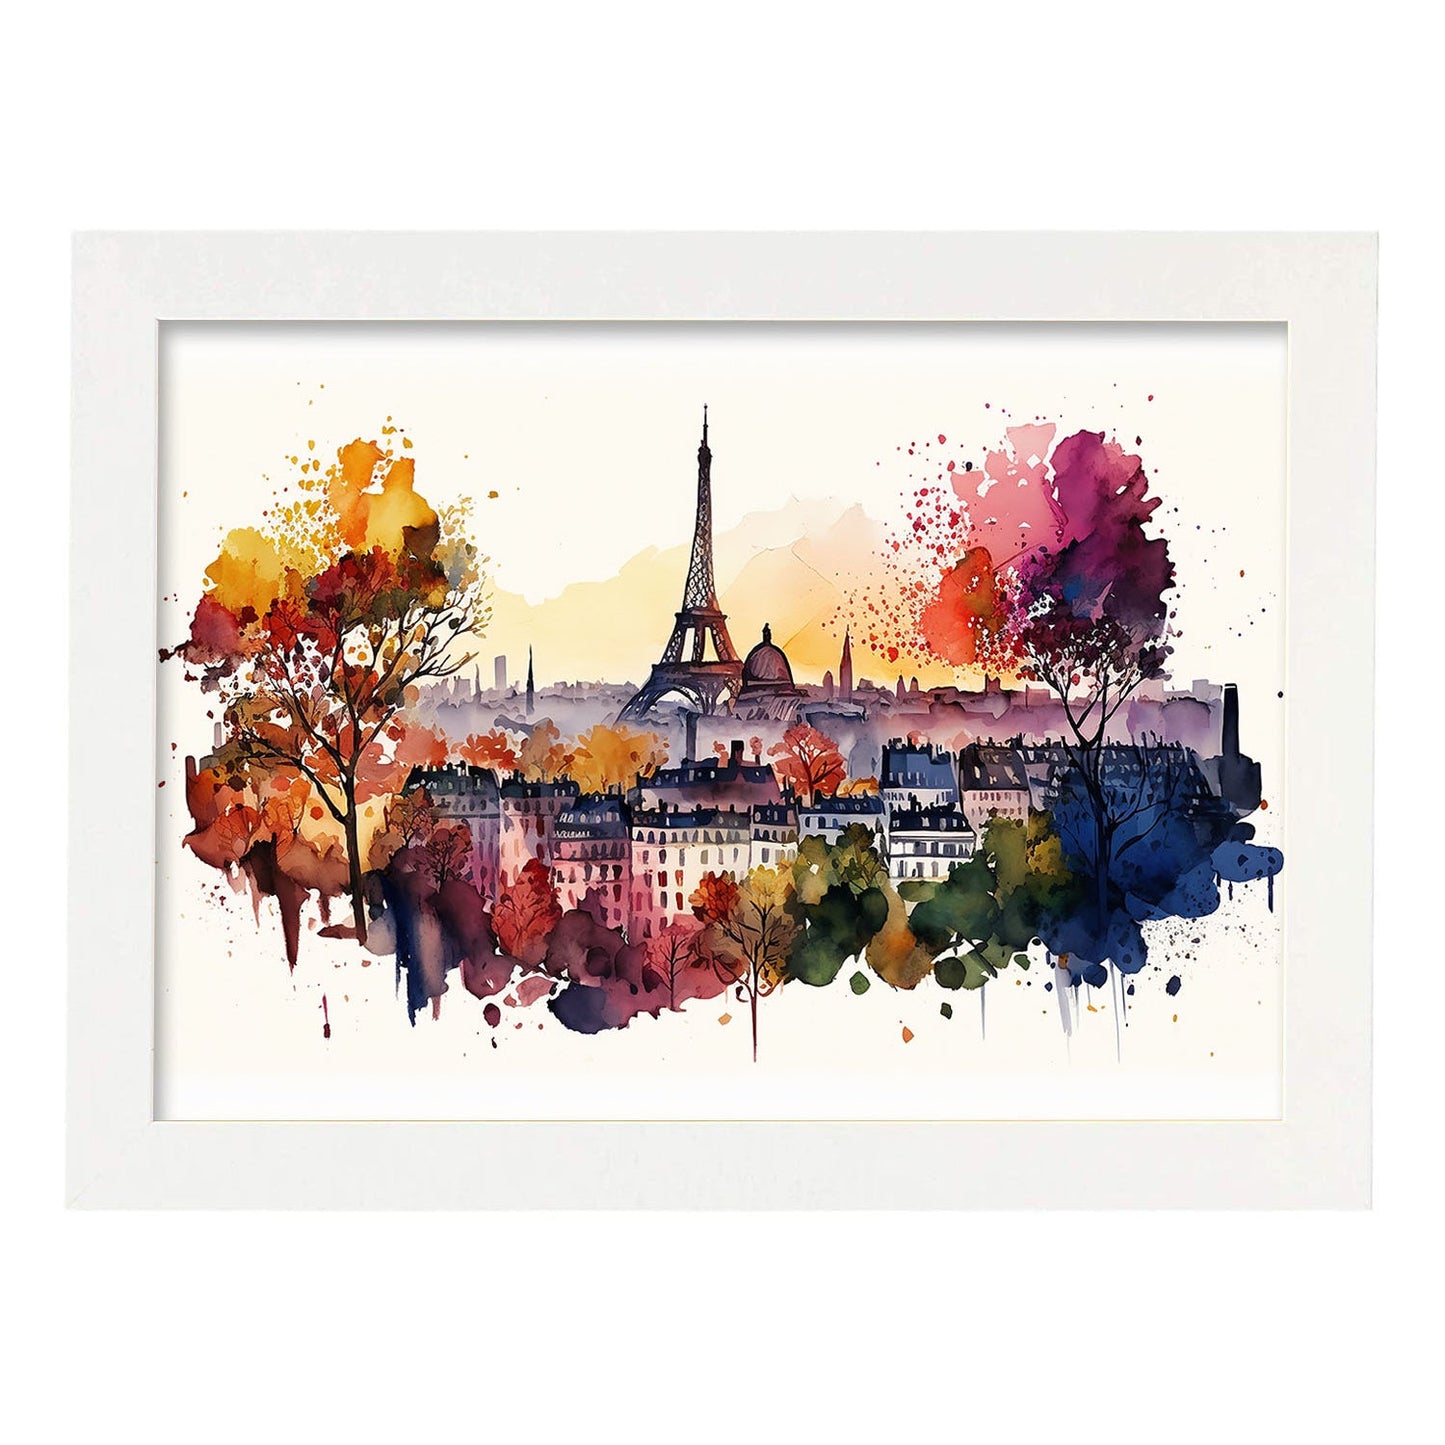 Nacnic watercolor of a skyline of the city of paris. Aesthetic Wall Art Prints for Bedroom or Living Room Design.-Artwork-Nacnic-A4-Marco Blanco-Nacnic Estudio SL